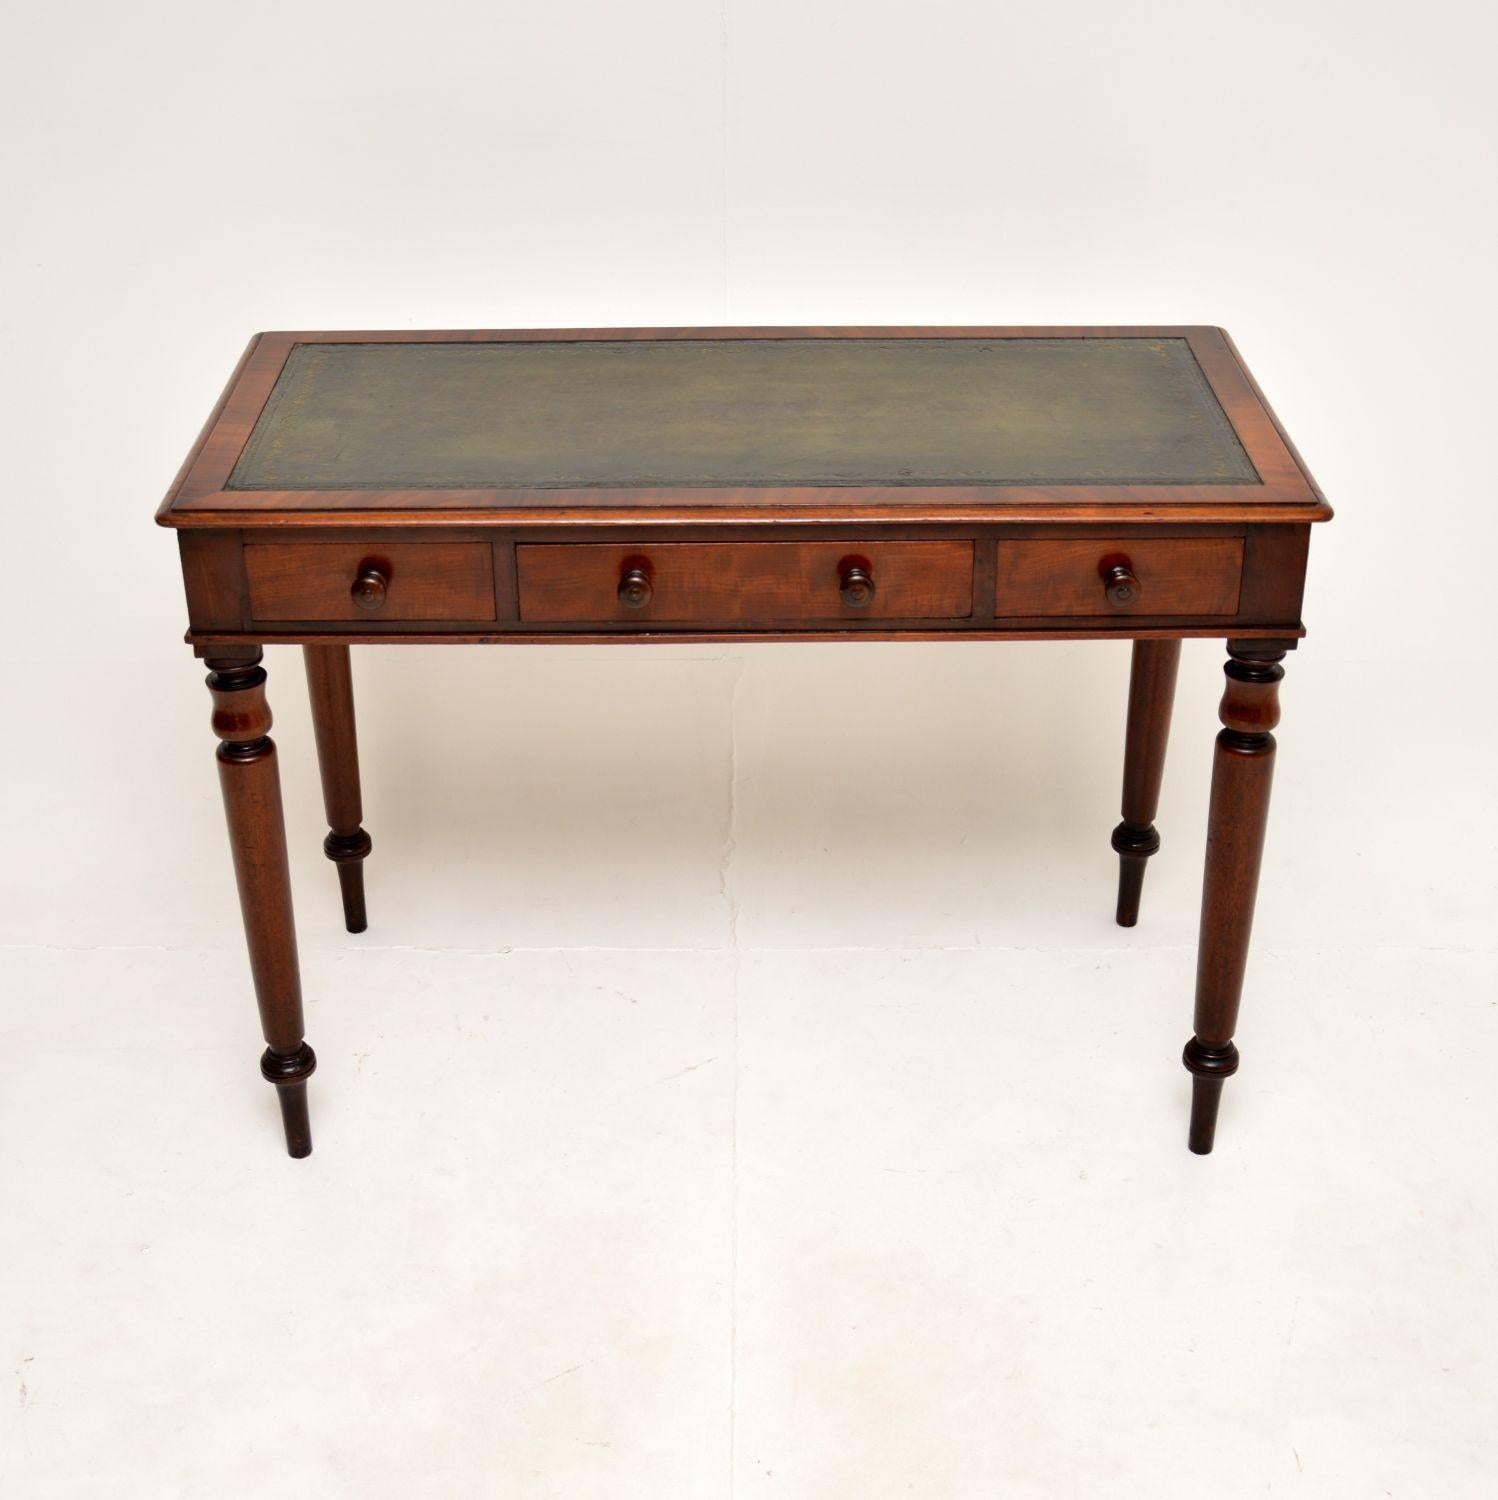 A superb antique Victorian leather top writing table / desk. This was made in England, it dates from around the 1860-1880 period.

It is of fantastic quality and is a very useful size. It sits on beautifully turned legs and also has lovely turned